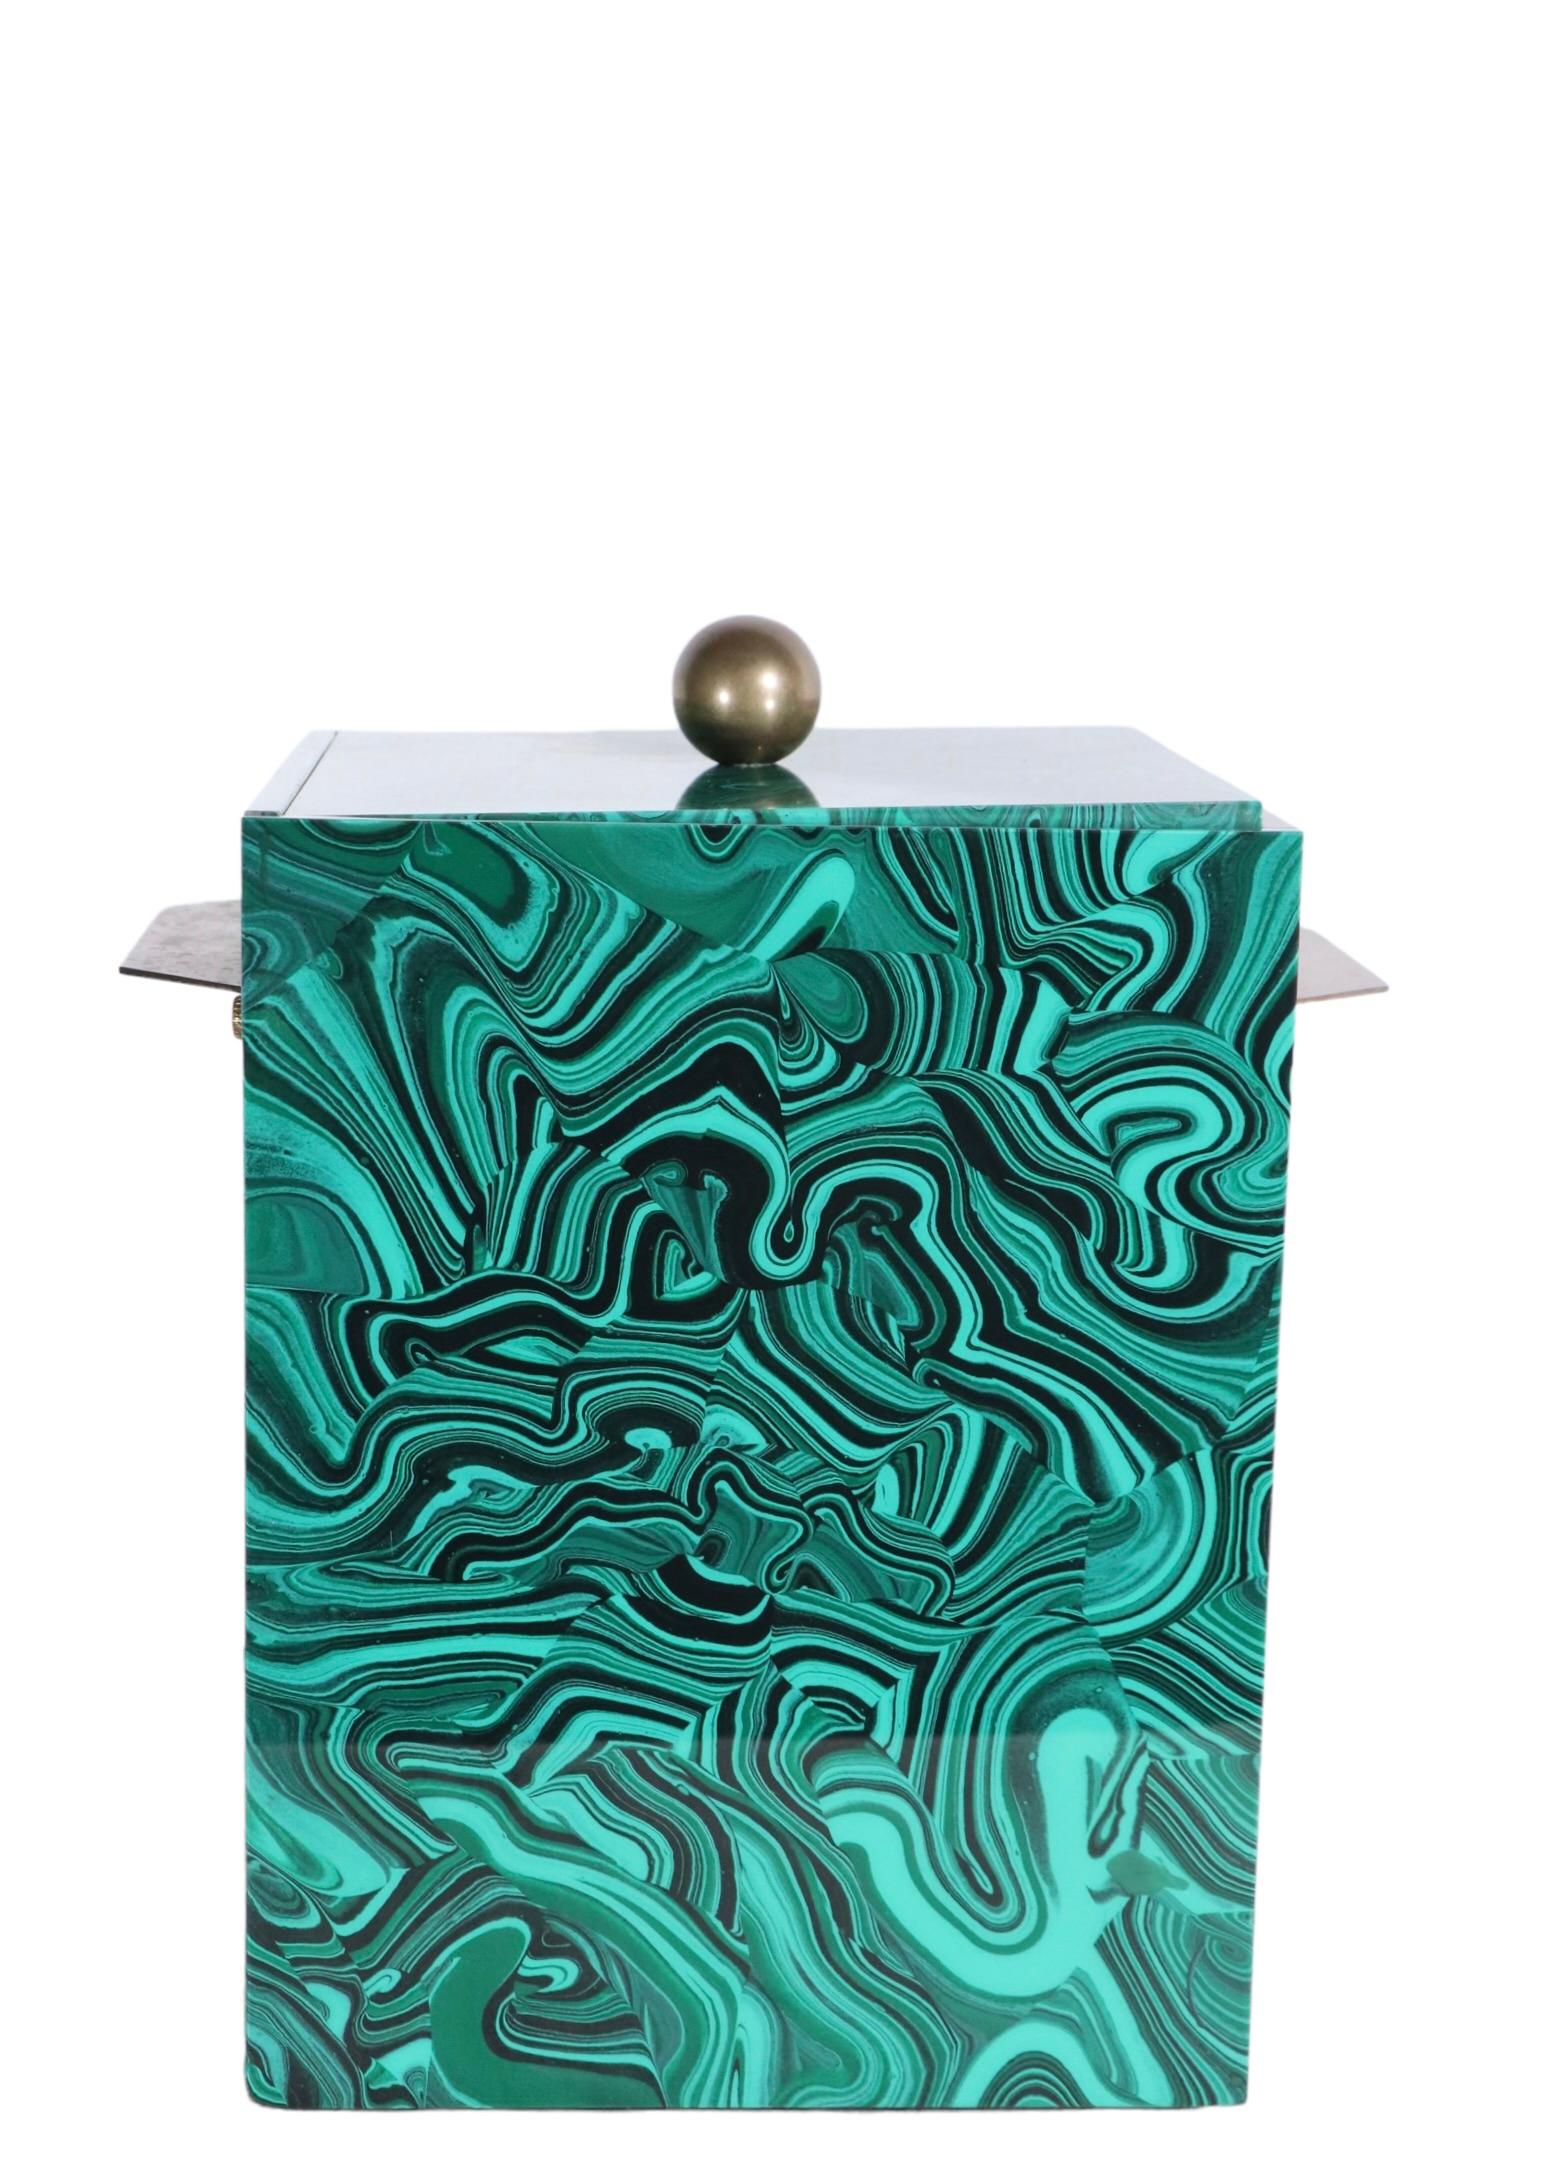 American Ice Bucket in Stunning Faux Malachite Finish by Imperial Stone Ca. 1970's